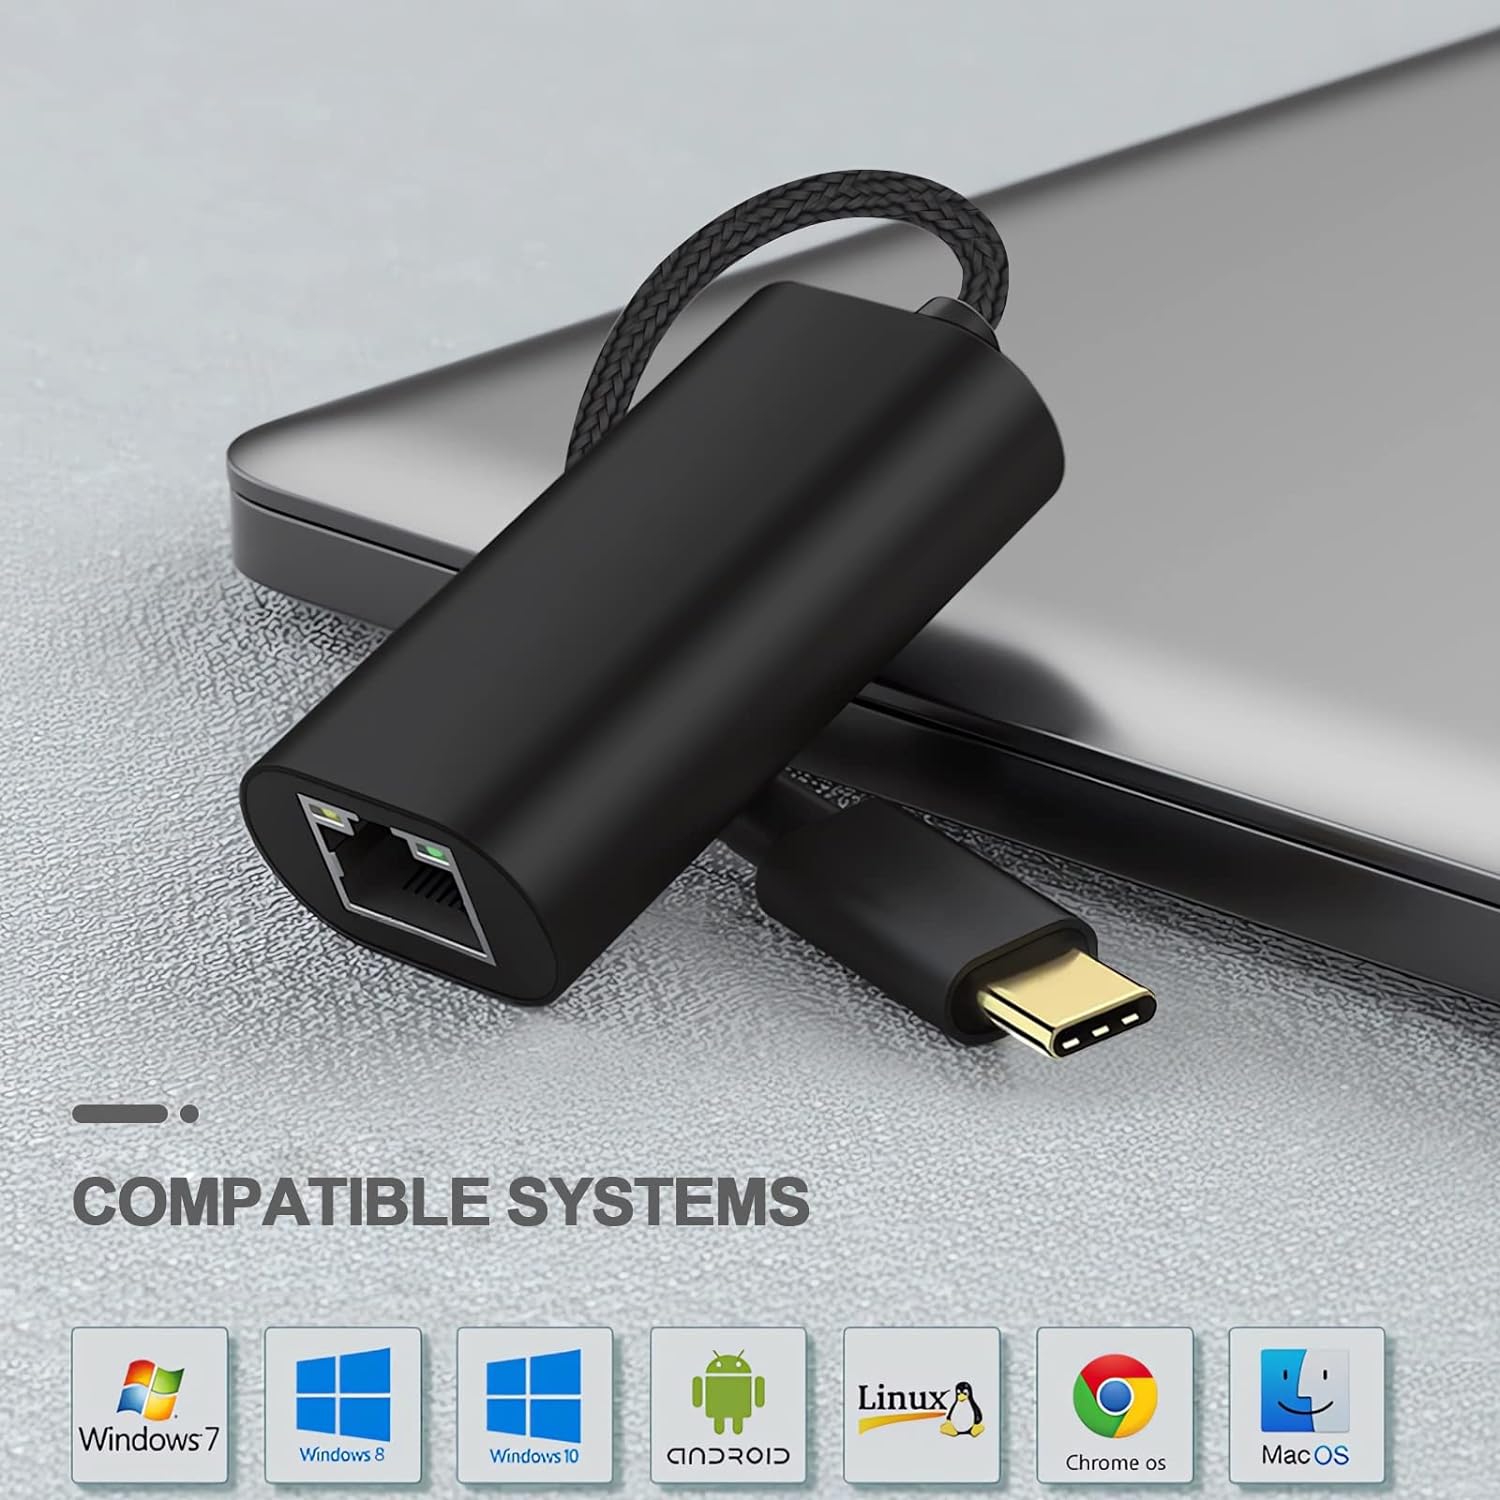 Henrety USB-C to Gigabit Ethernet Adapter for Laptops, PC, and Nintendo Switch - Compatible with Windows, macOS, Linux, and More - Compact and Portable Design - Black